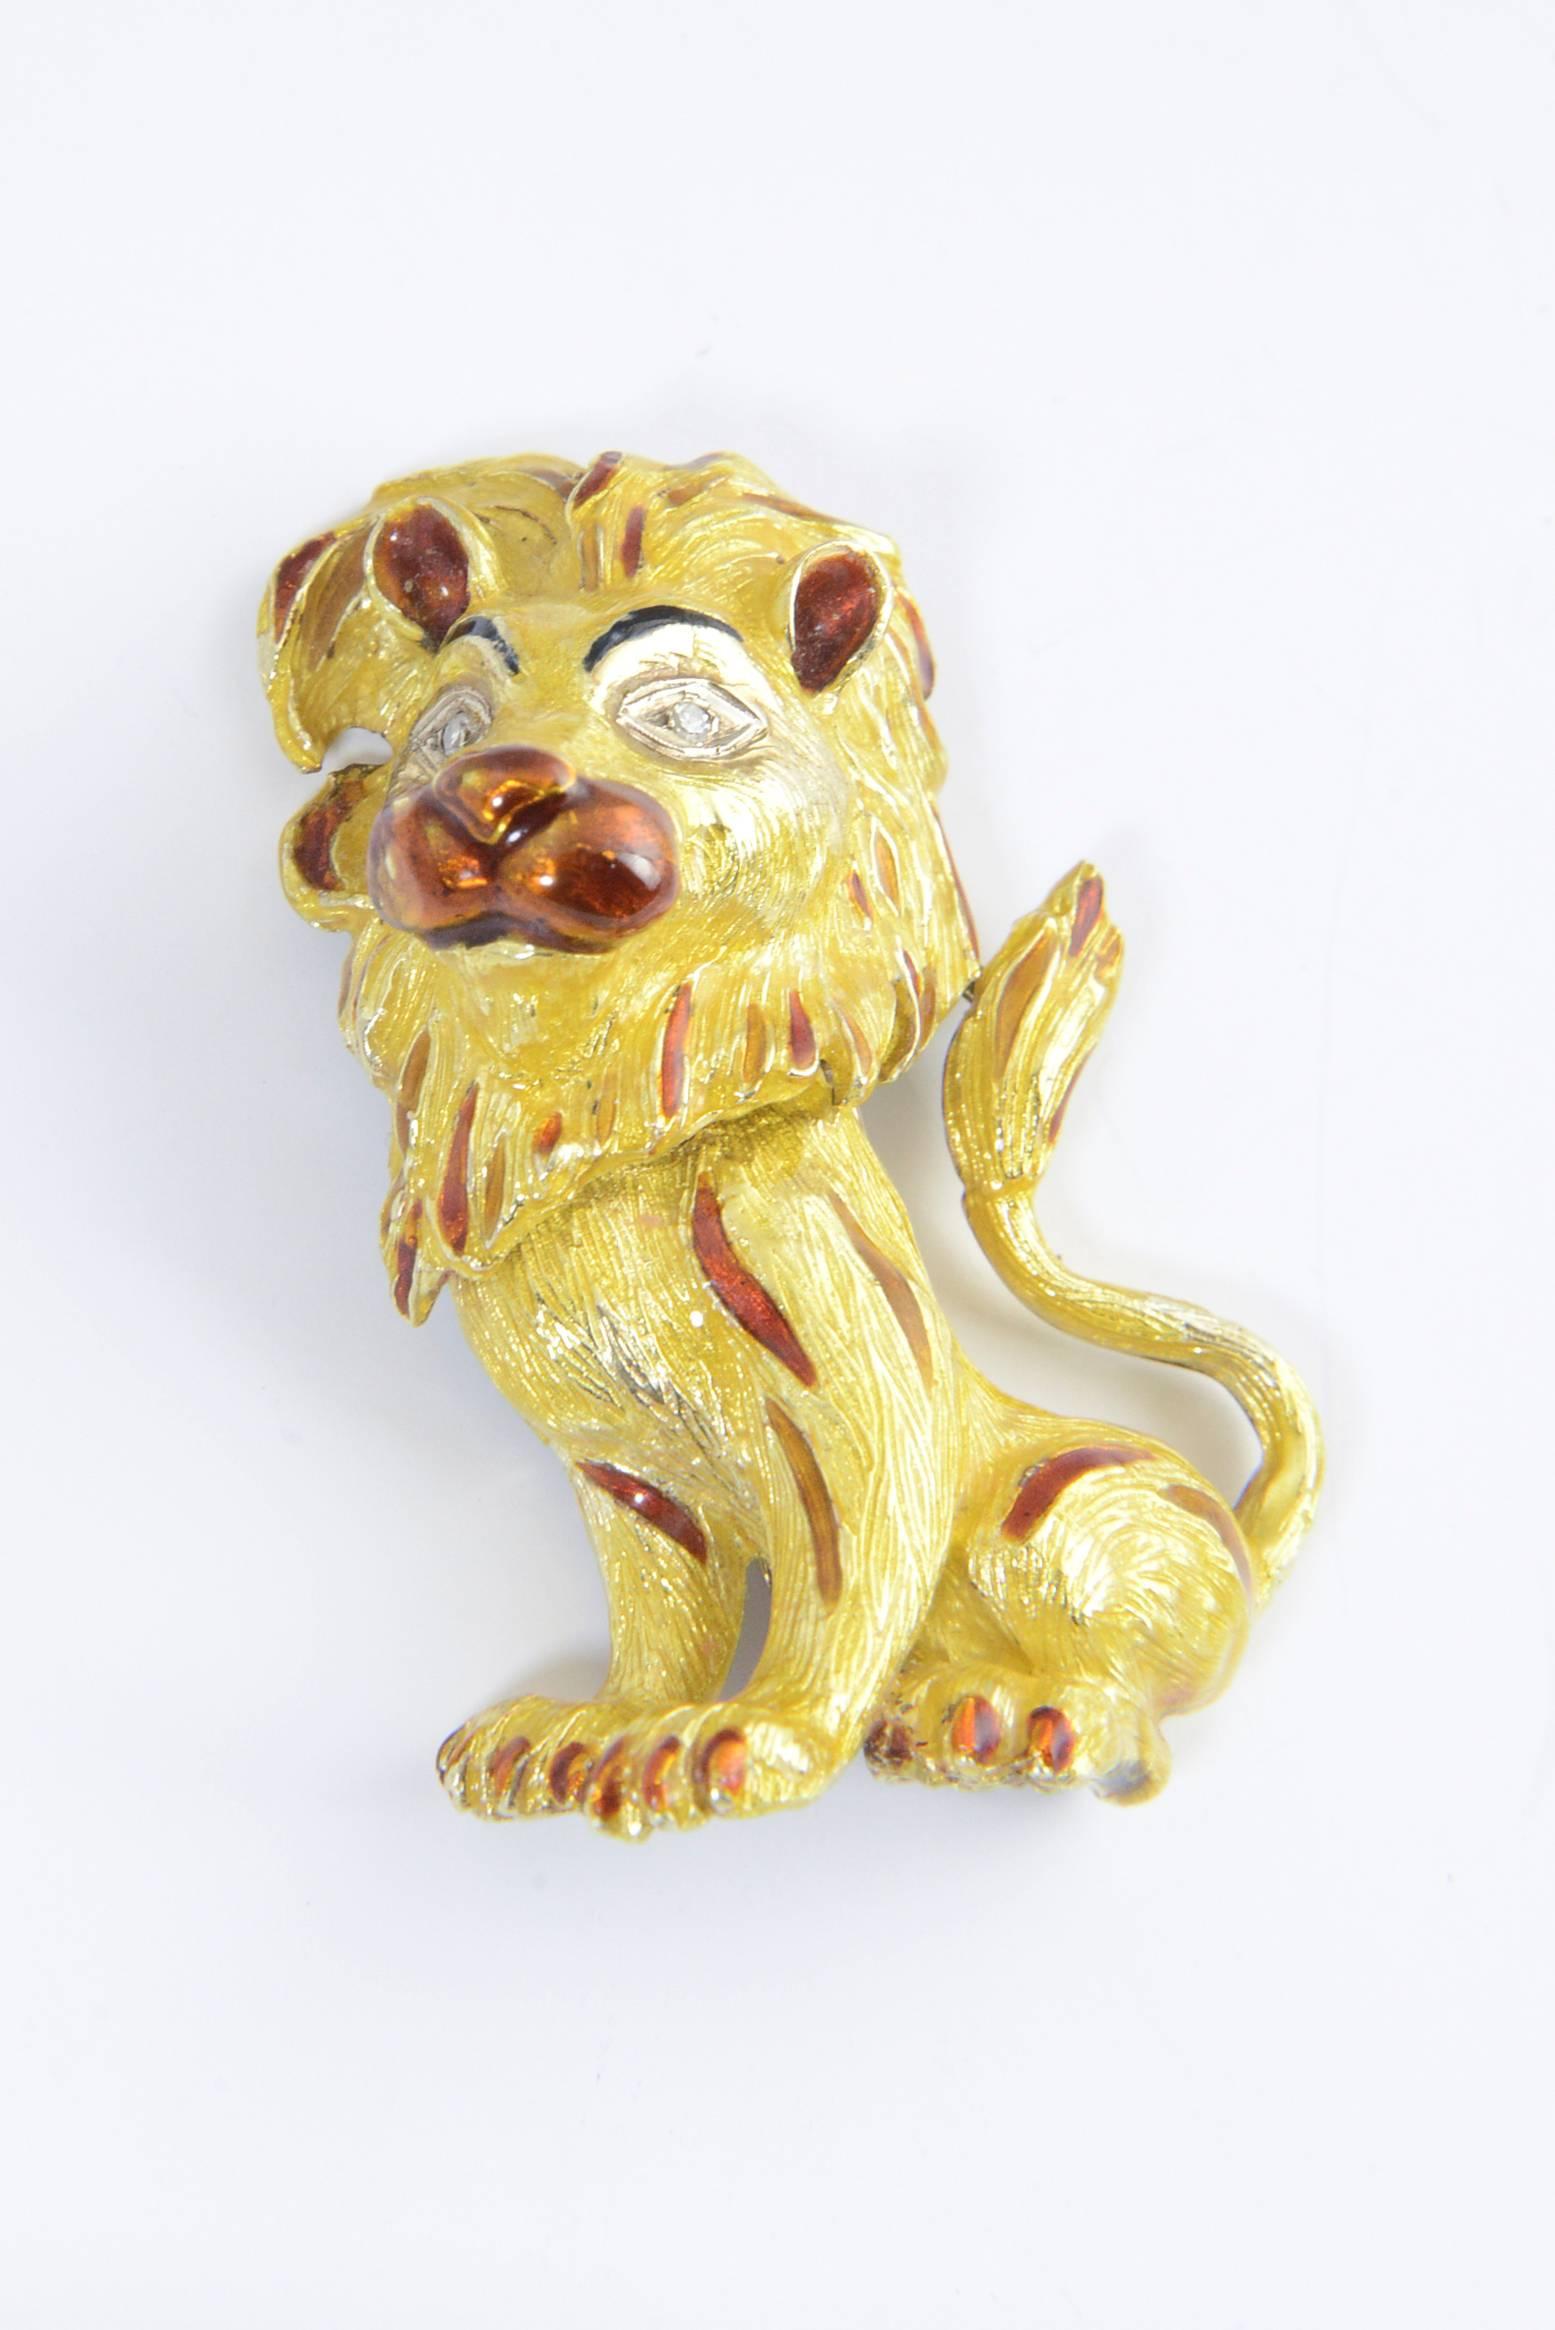 Adorable Large 14K yellow gold and enamel lion brooch with diamond eyes.  Perfect for an animal lover or a Leo.